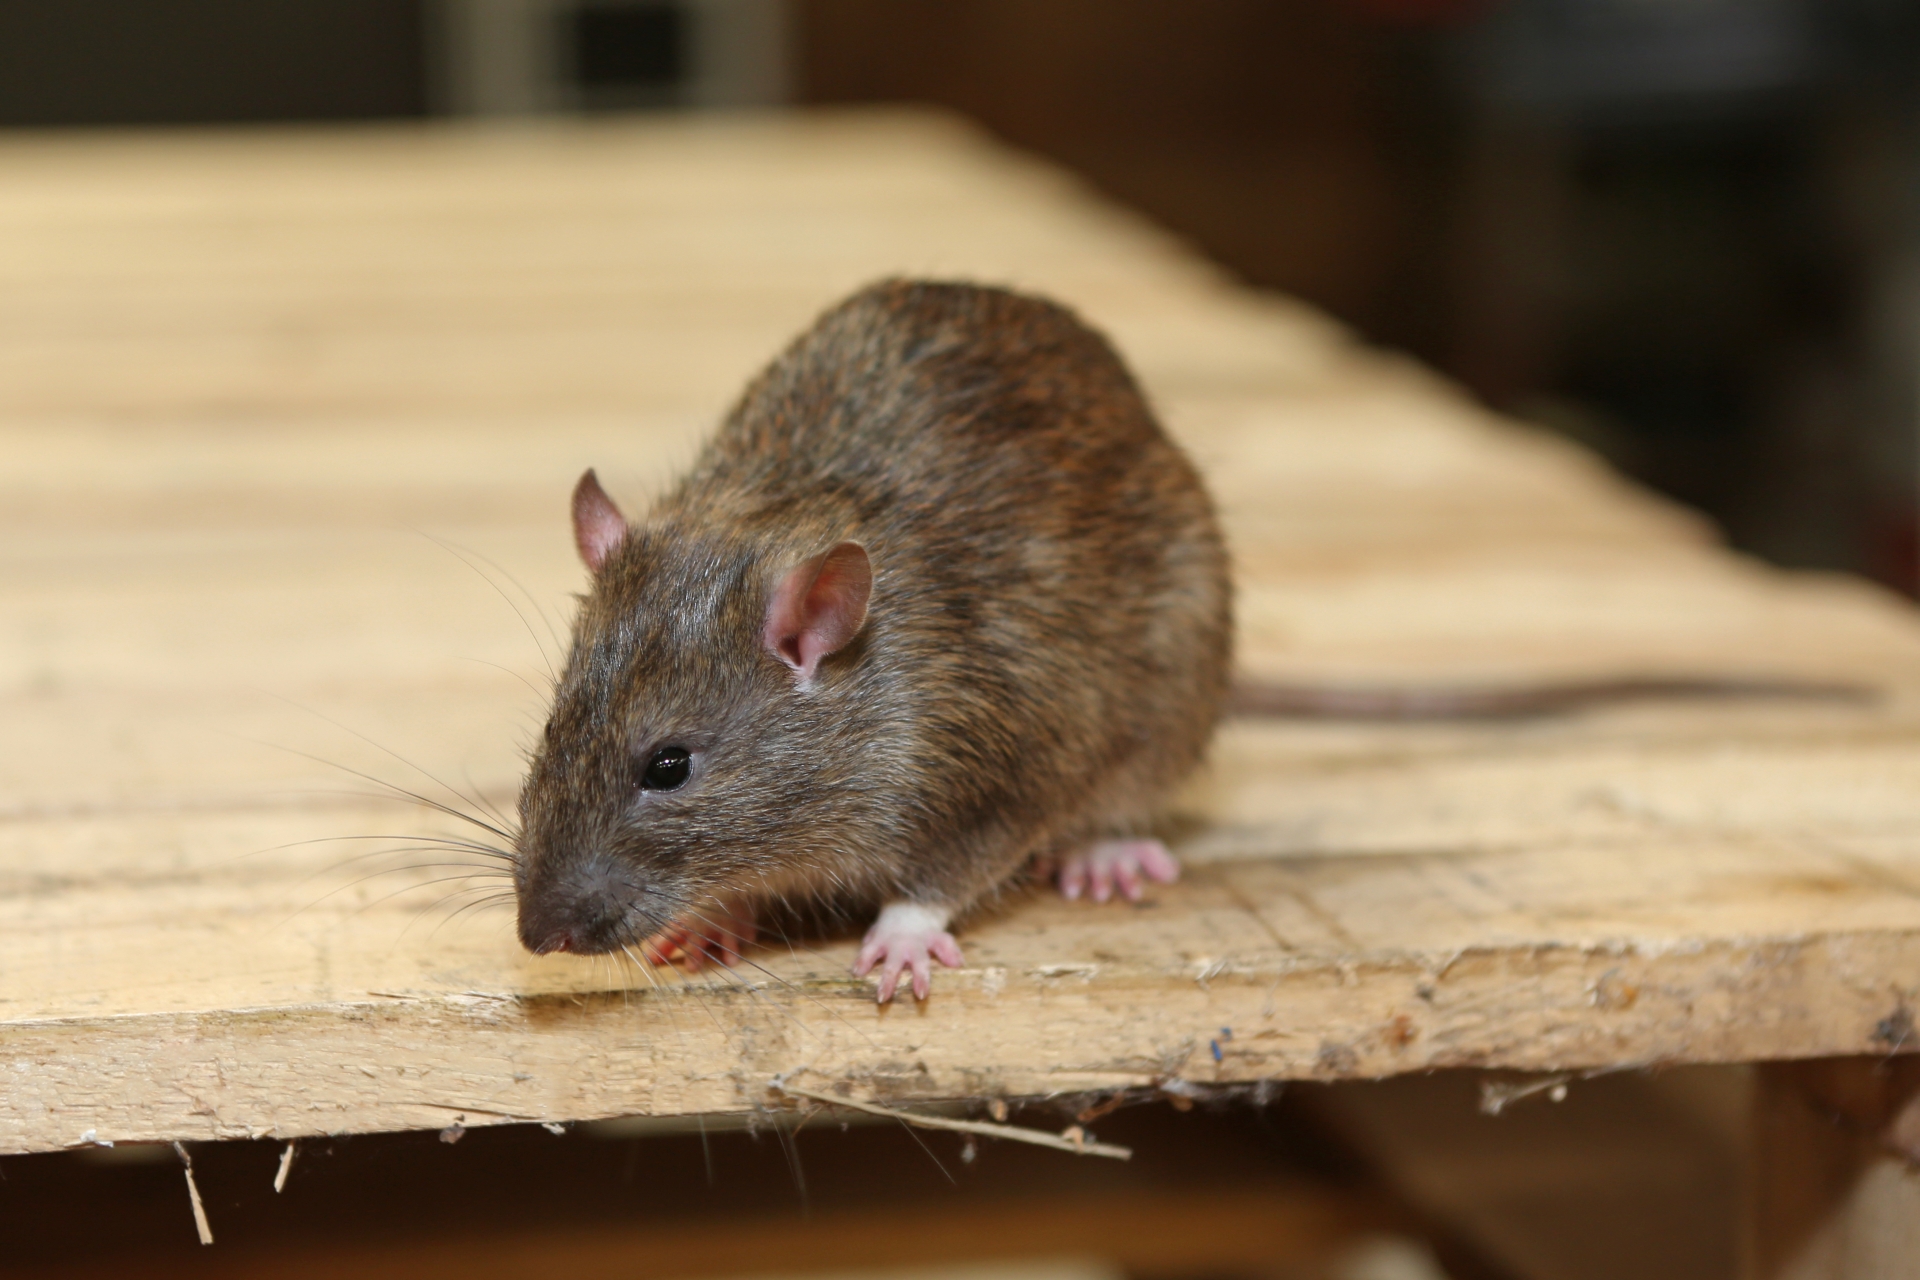 Rat Control, Pest Control in Norbury, SW16. Call Now 020 8166 9746